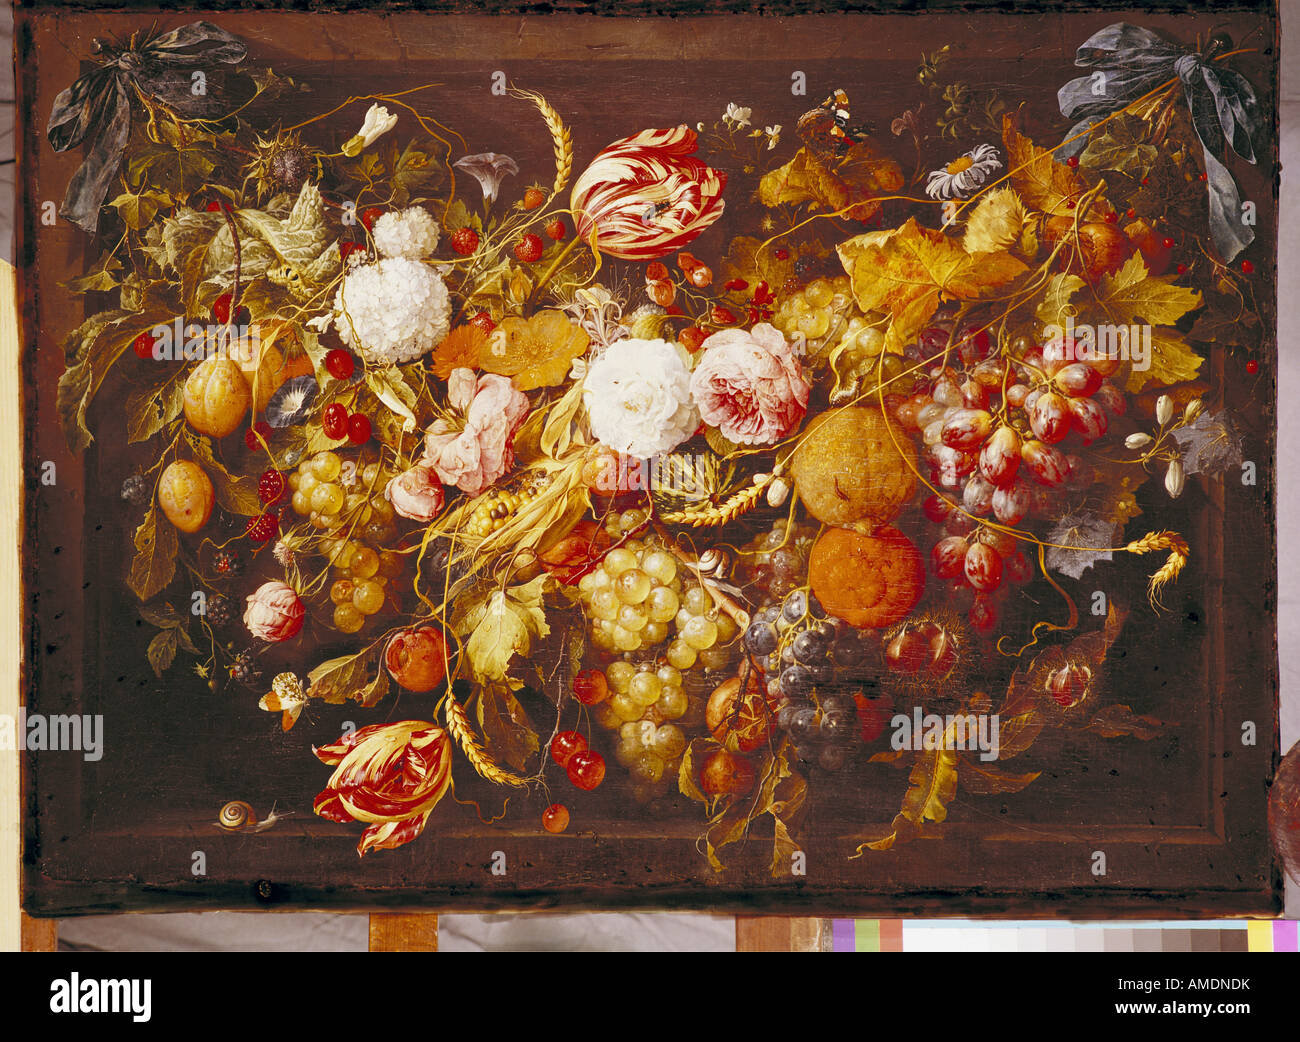 fine arts, Heem, Jan Davidsz de, (1606 - 26.4.1683), painting, 'festoon with flowers and fruit', 17th century, state gallery, Karlsruhe, Germany, , Artist's Copyright has not to be cleared Stock Photo